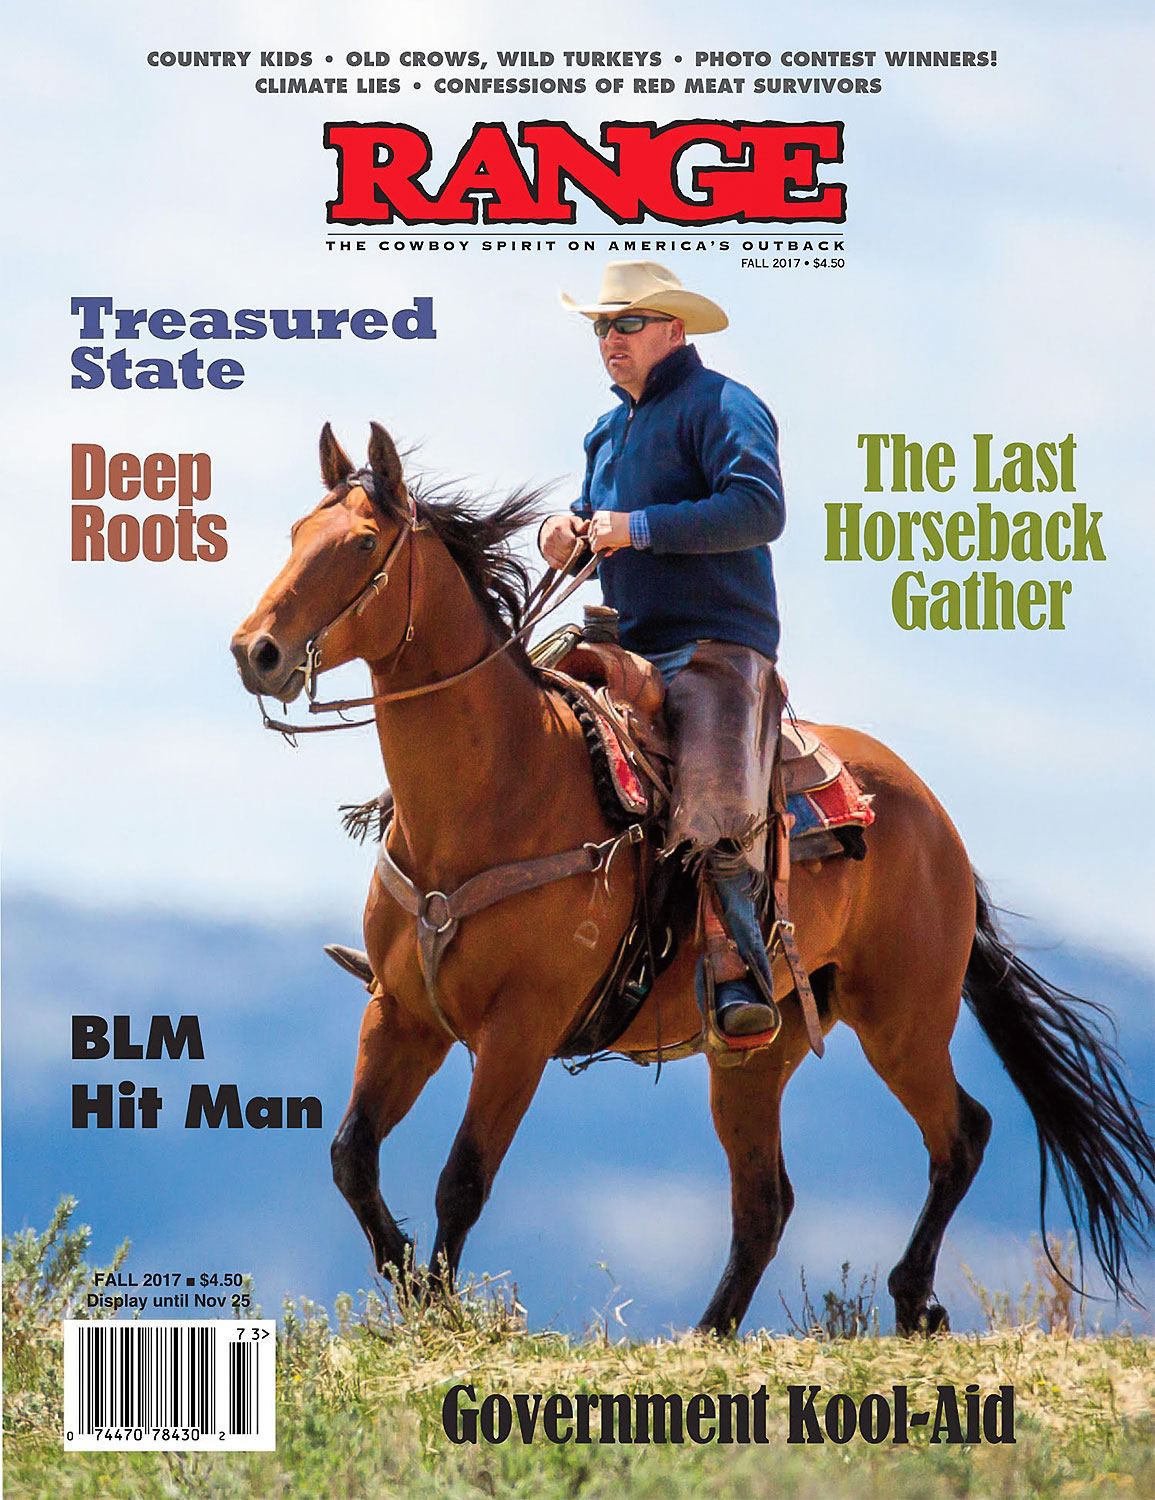 One of my many photos of cowboys appears here on the cover of the fall 2017 issue of Range Magazine, which hits the newsstands in another few weeks.